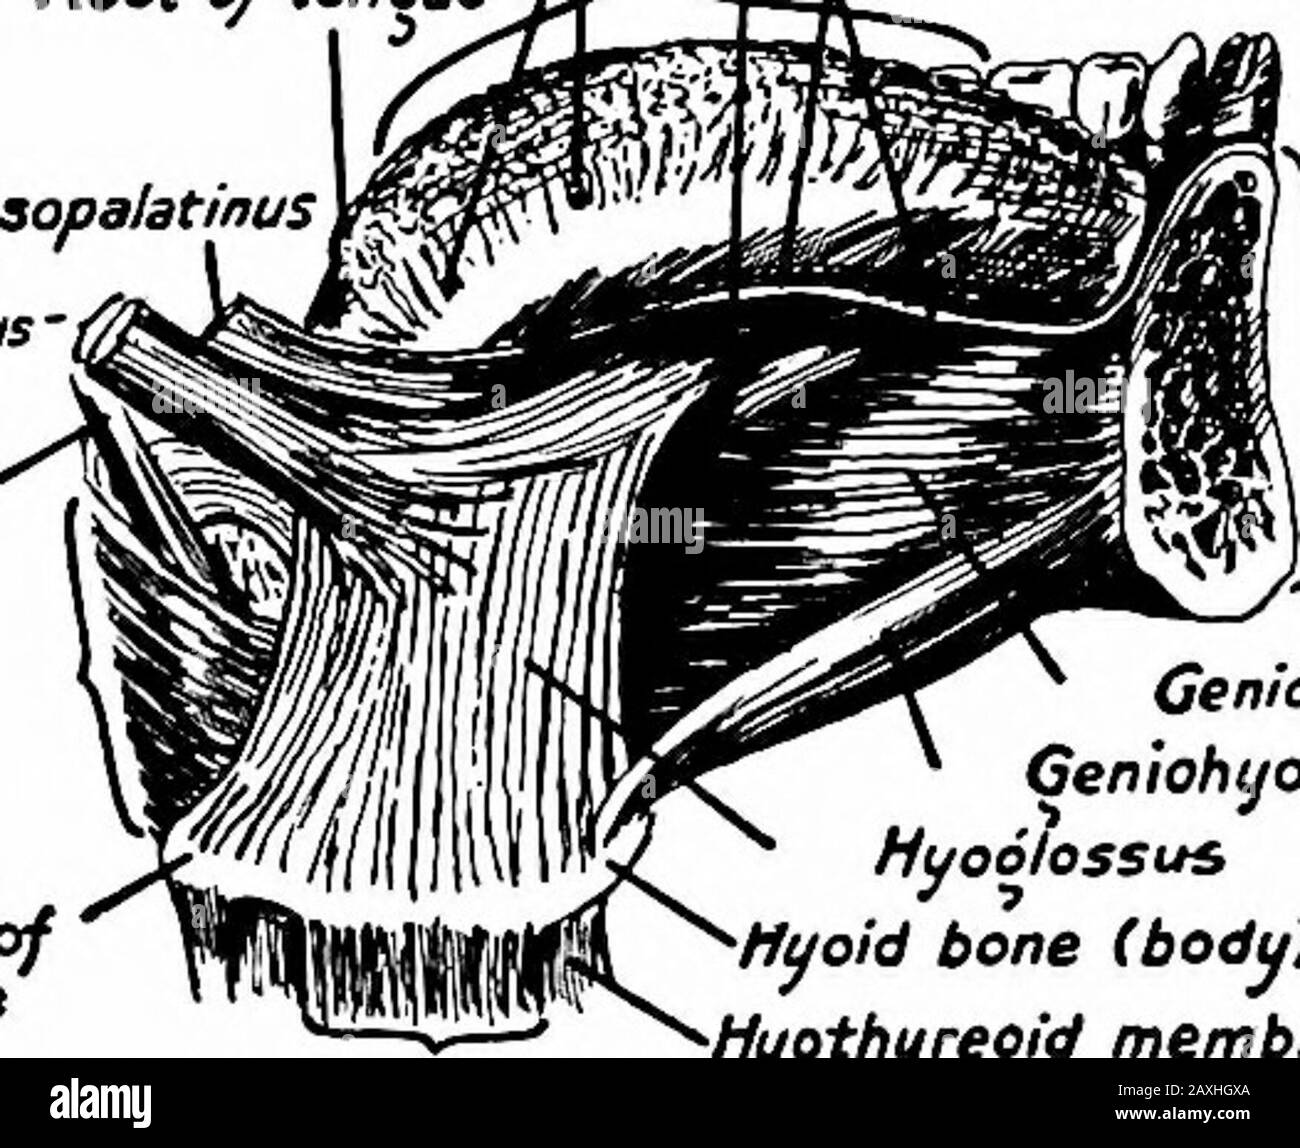 A manual of anatomy . ions.—Elevates the hyoid bone and depresses the mandible. Nerve Supply.—Mylohyoid branch of the inferior dental nerve(trigeminal). iS6 MYOLOGY The m. geniohyoideus arises from the inferior mental spines (me-dial surface of the symphysis menti) and is inserted into the ventralsurface of the body of the hyoid bone. Actions.—Elevates the hyoid bone and depresses the mandible. Nerve Supply.—First and second cervical nerves through thehypoglossal nerve. LINGtTAL IVrUSCLES The intrinsic muscles are given in the description of the Tongue(page 288). The extrinsic muscles are give Stock Photo